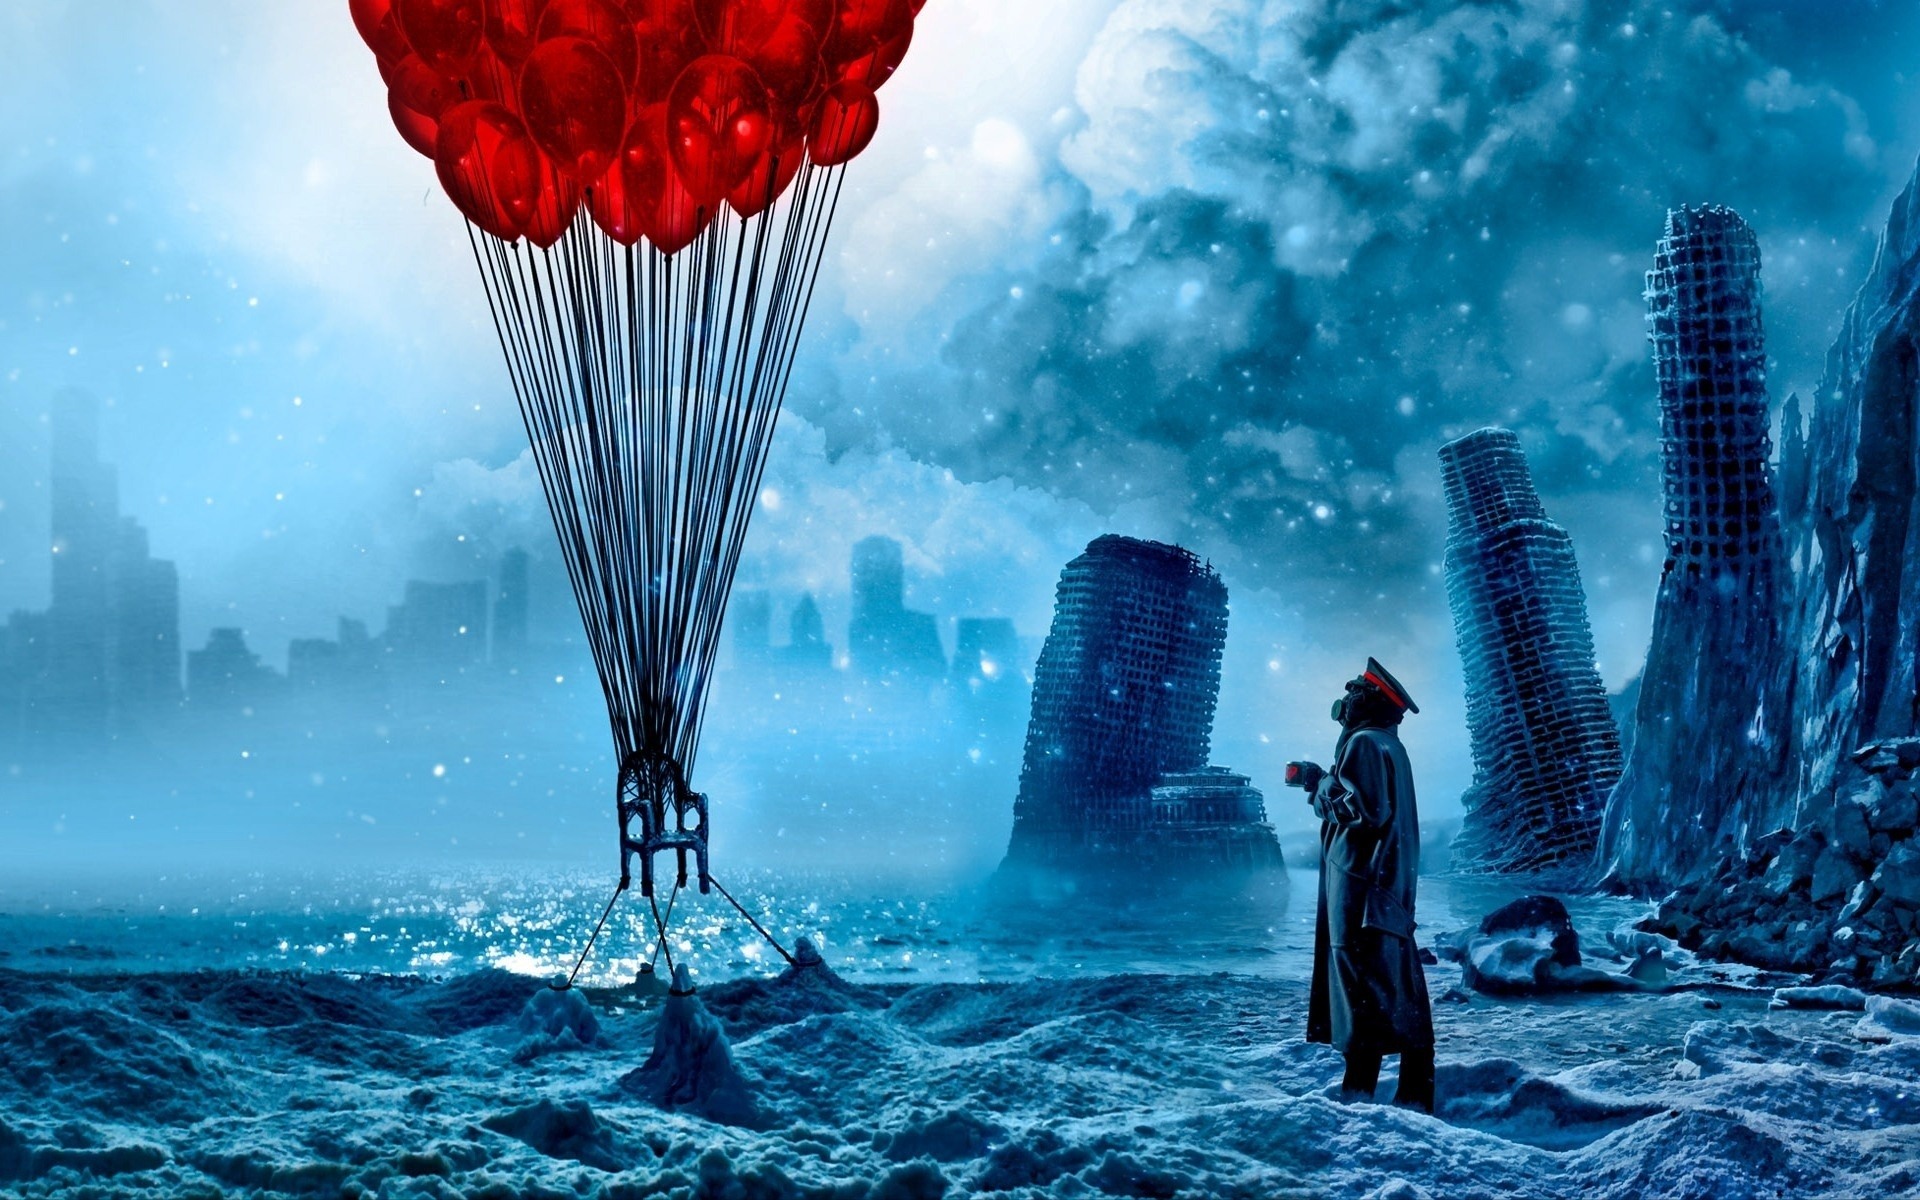 Romantically Apocalyptic creative painting wallpapers (1) #1 - 1920x1200